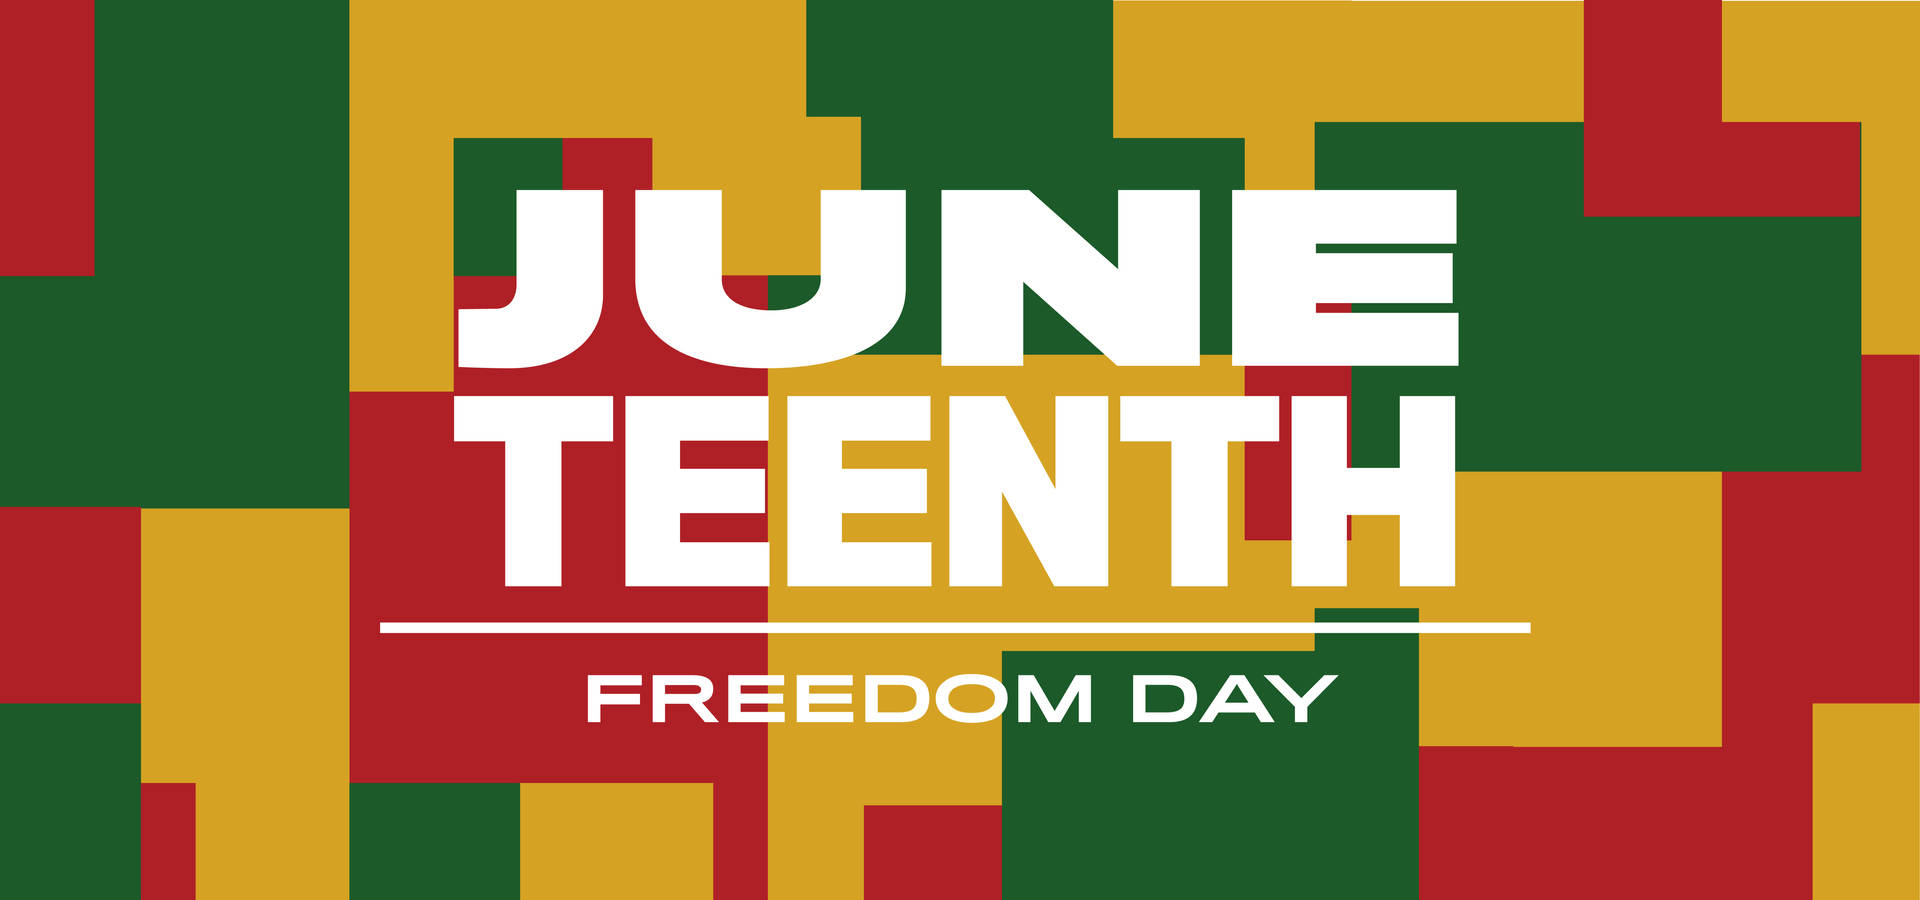 Juneteenth Freedom Day Poster Wallpaper